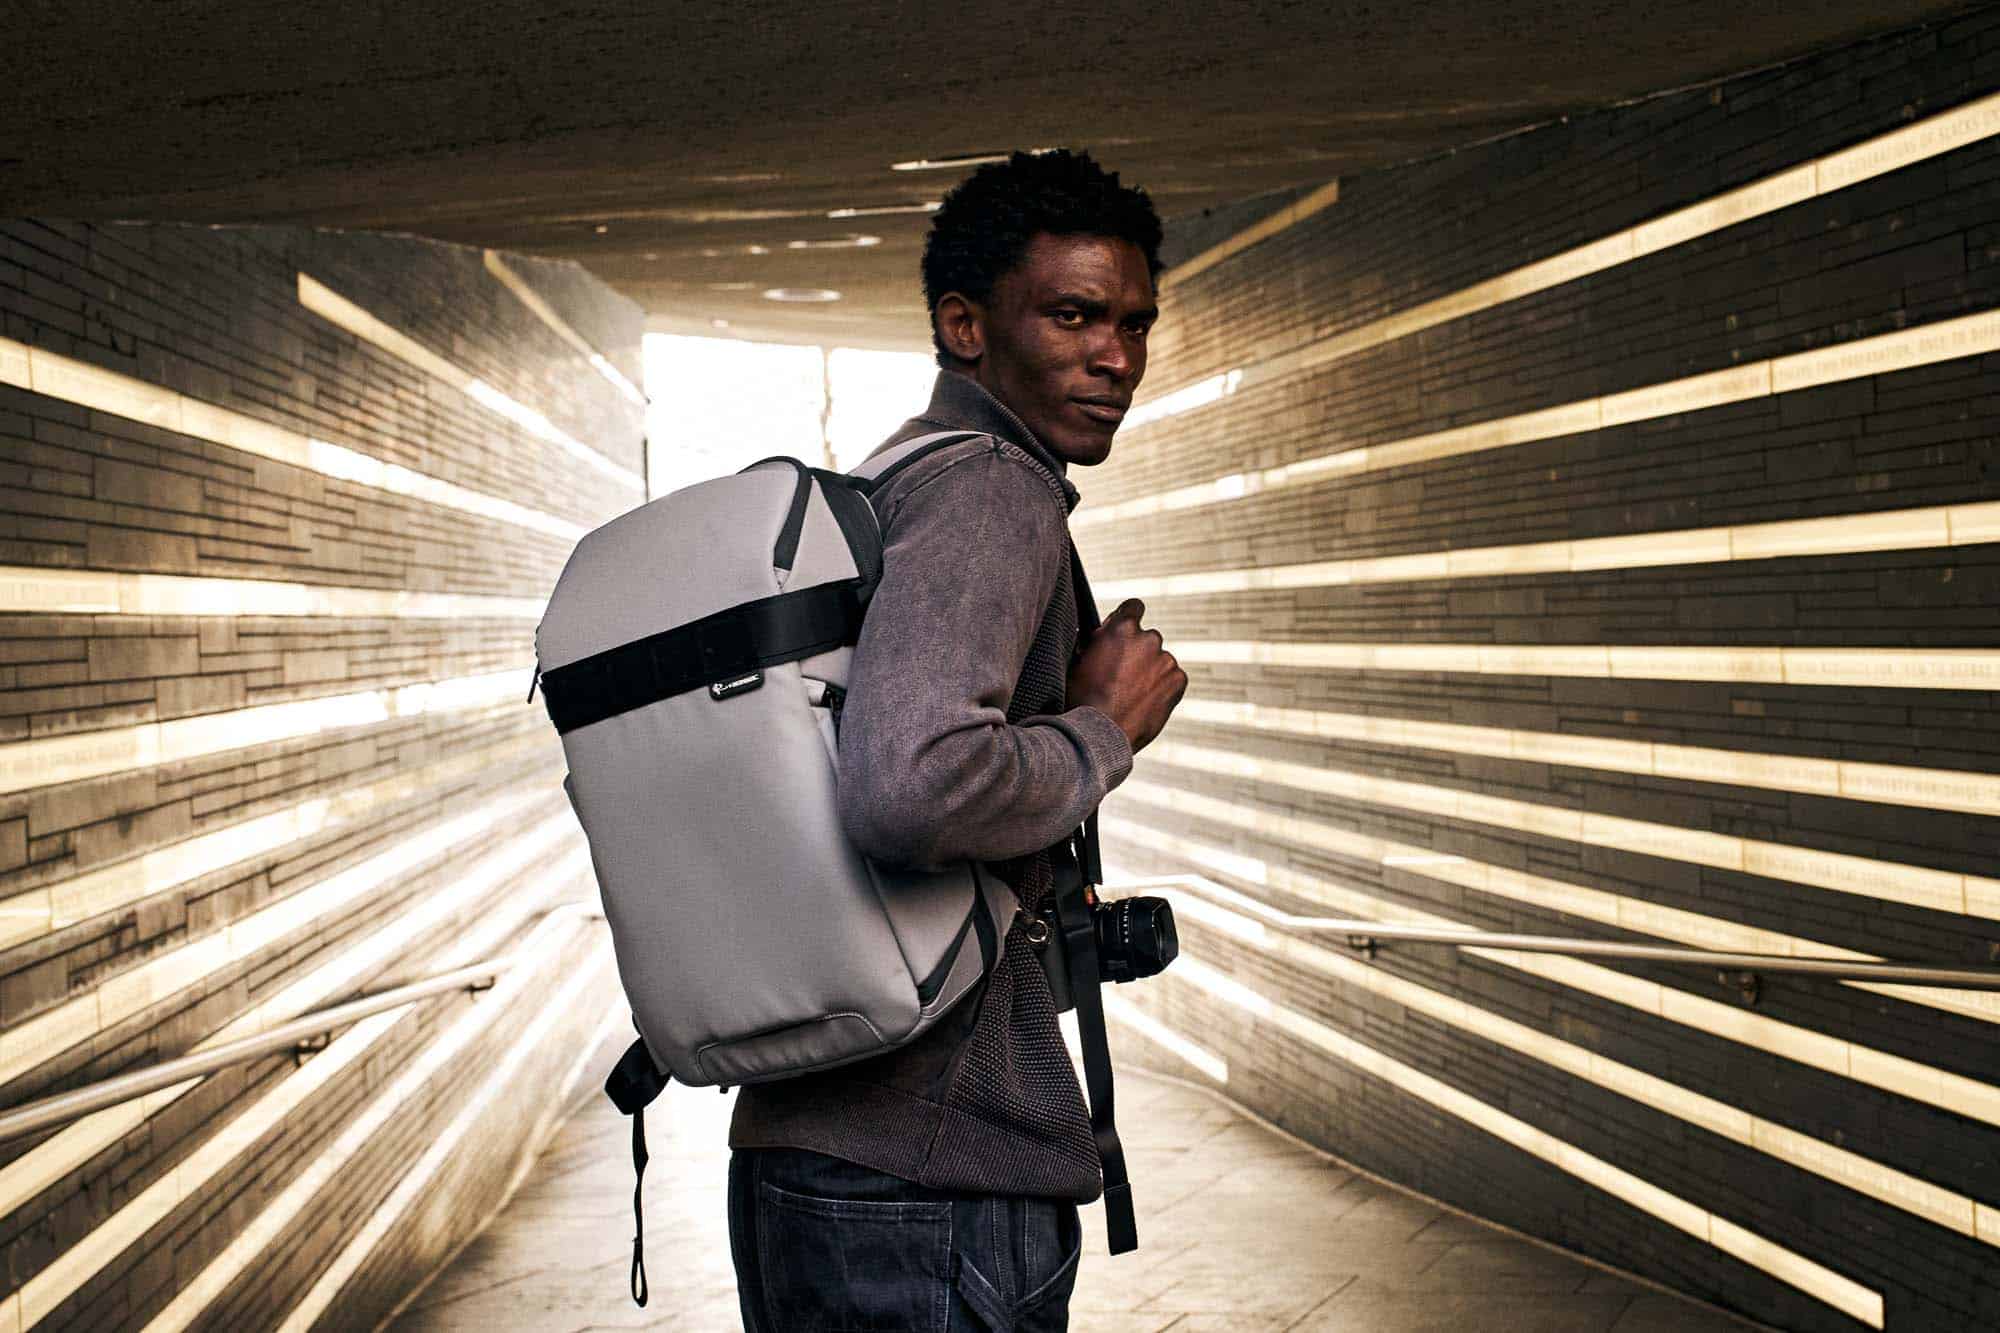 Level Up Your Daily Camera Carry Solution with the NOMATIC x Peter McKinnon Luma Camera Bag Collection